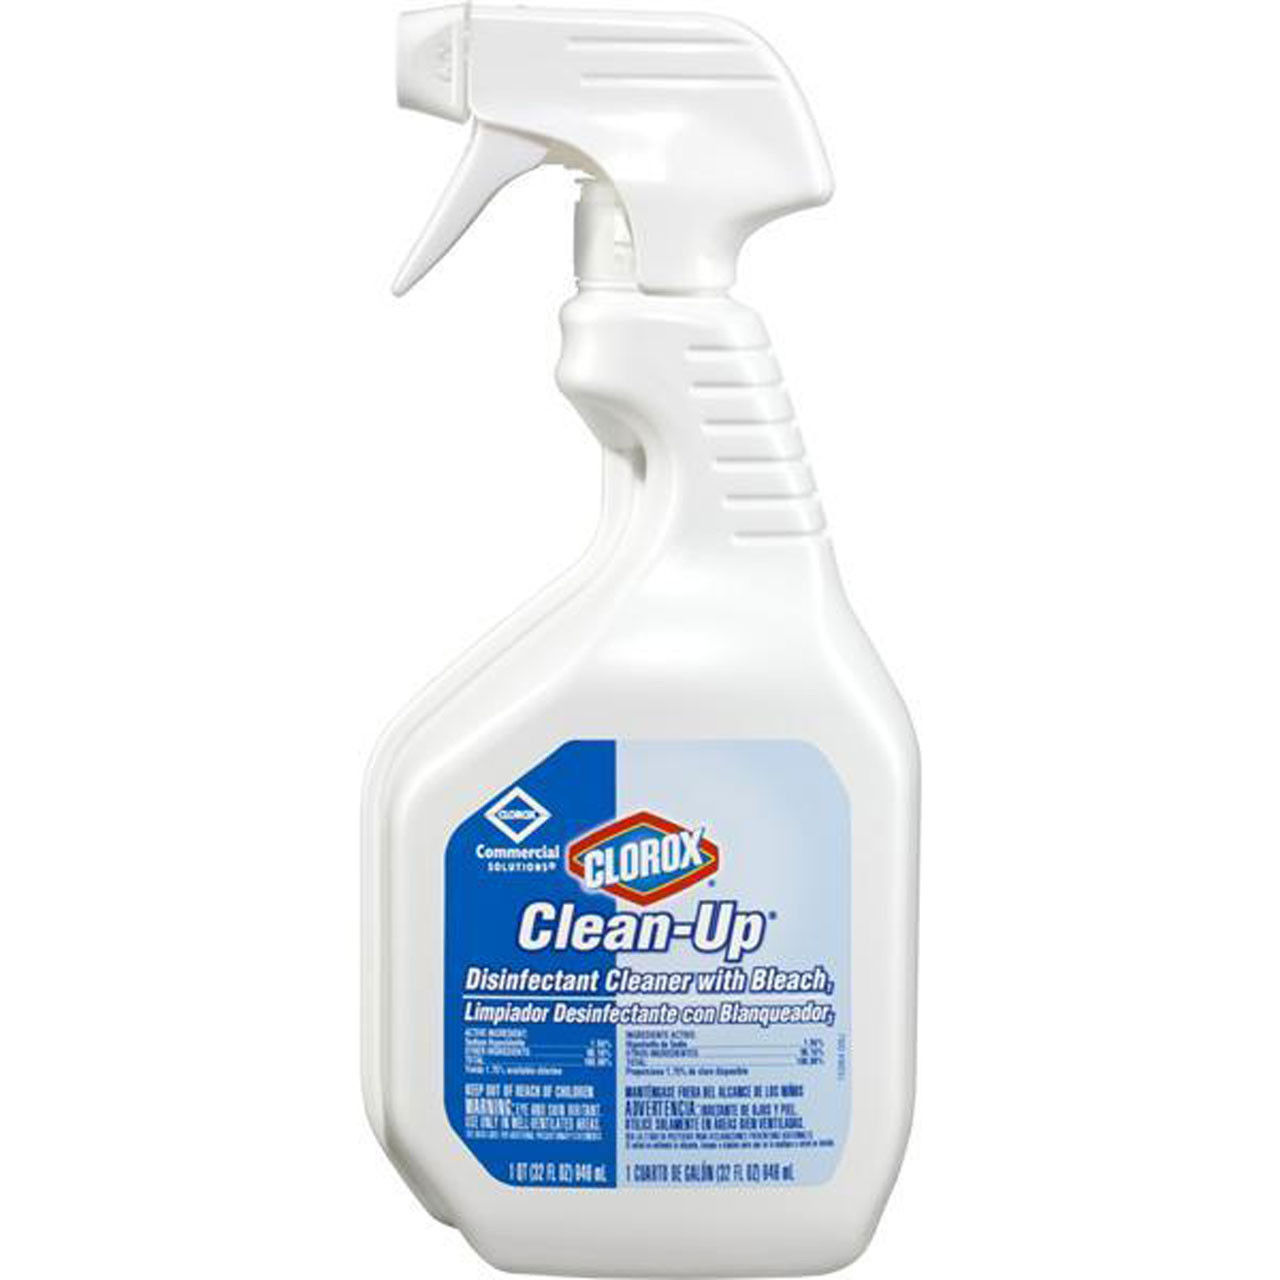 Clorox Clean-Up Disinfectant Spray Cleaner With Bleach Questions & Answers